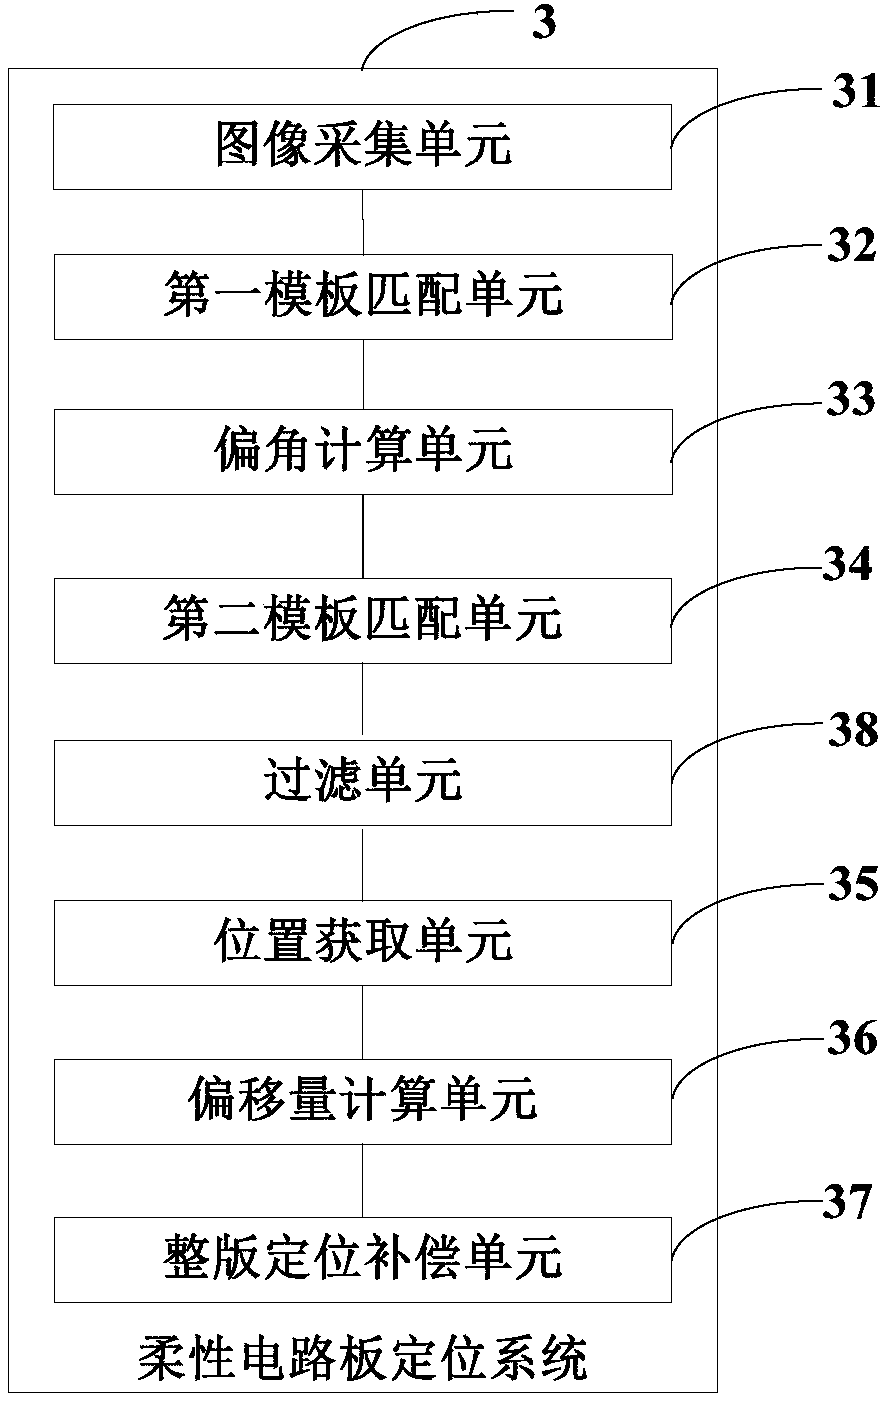 Flexible circuit board positioning method, device and computer readable storage medium